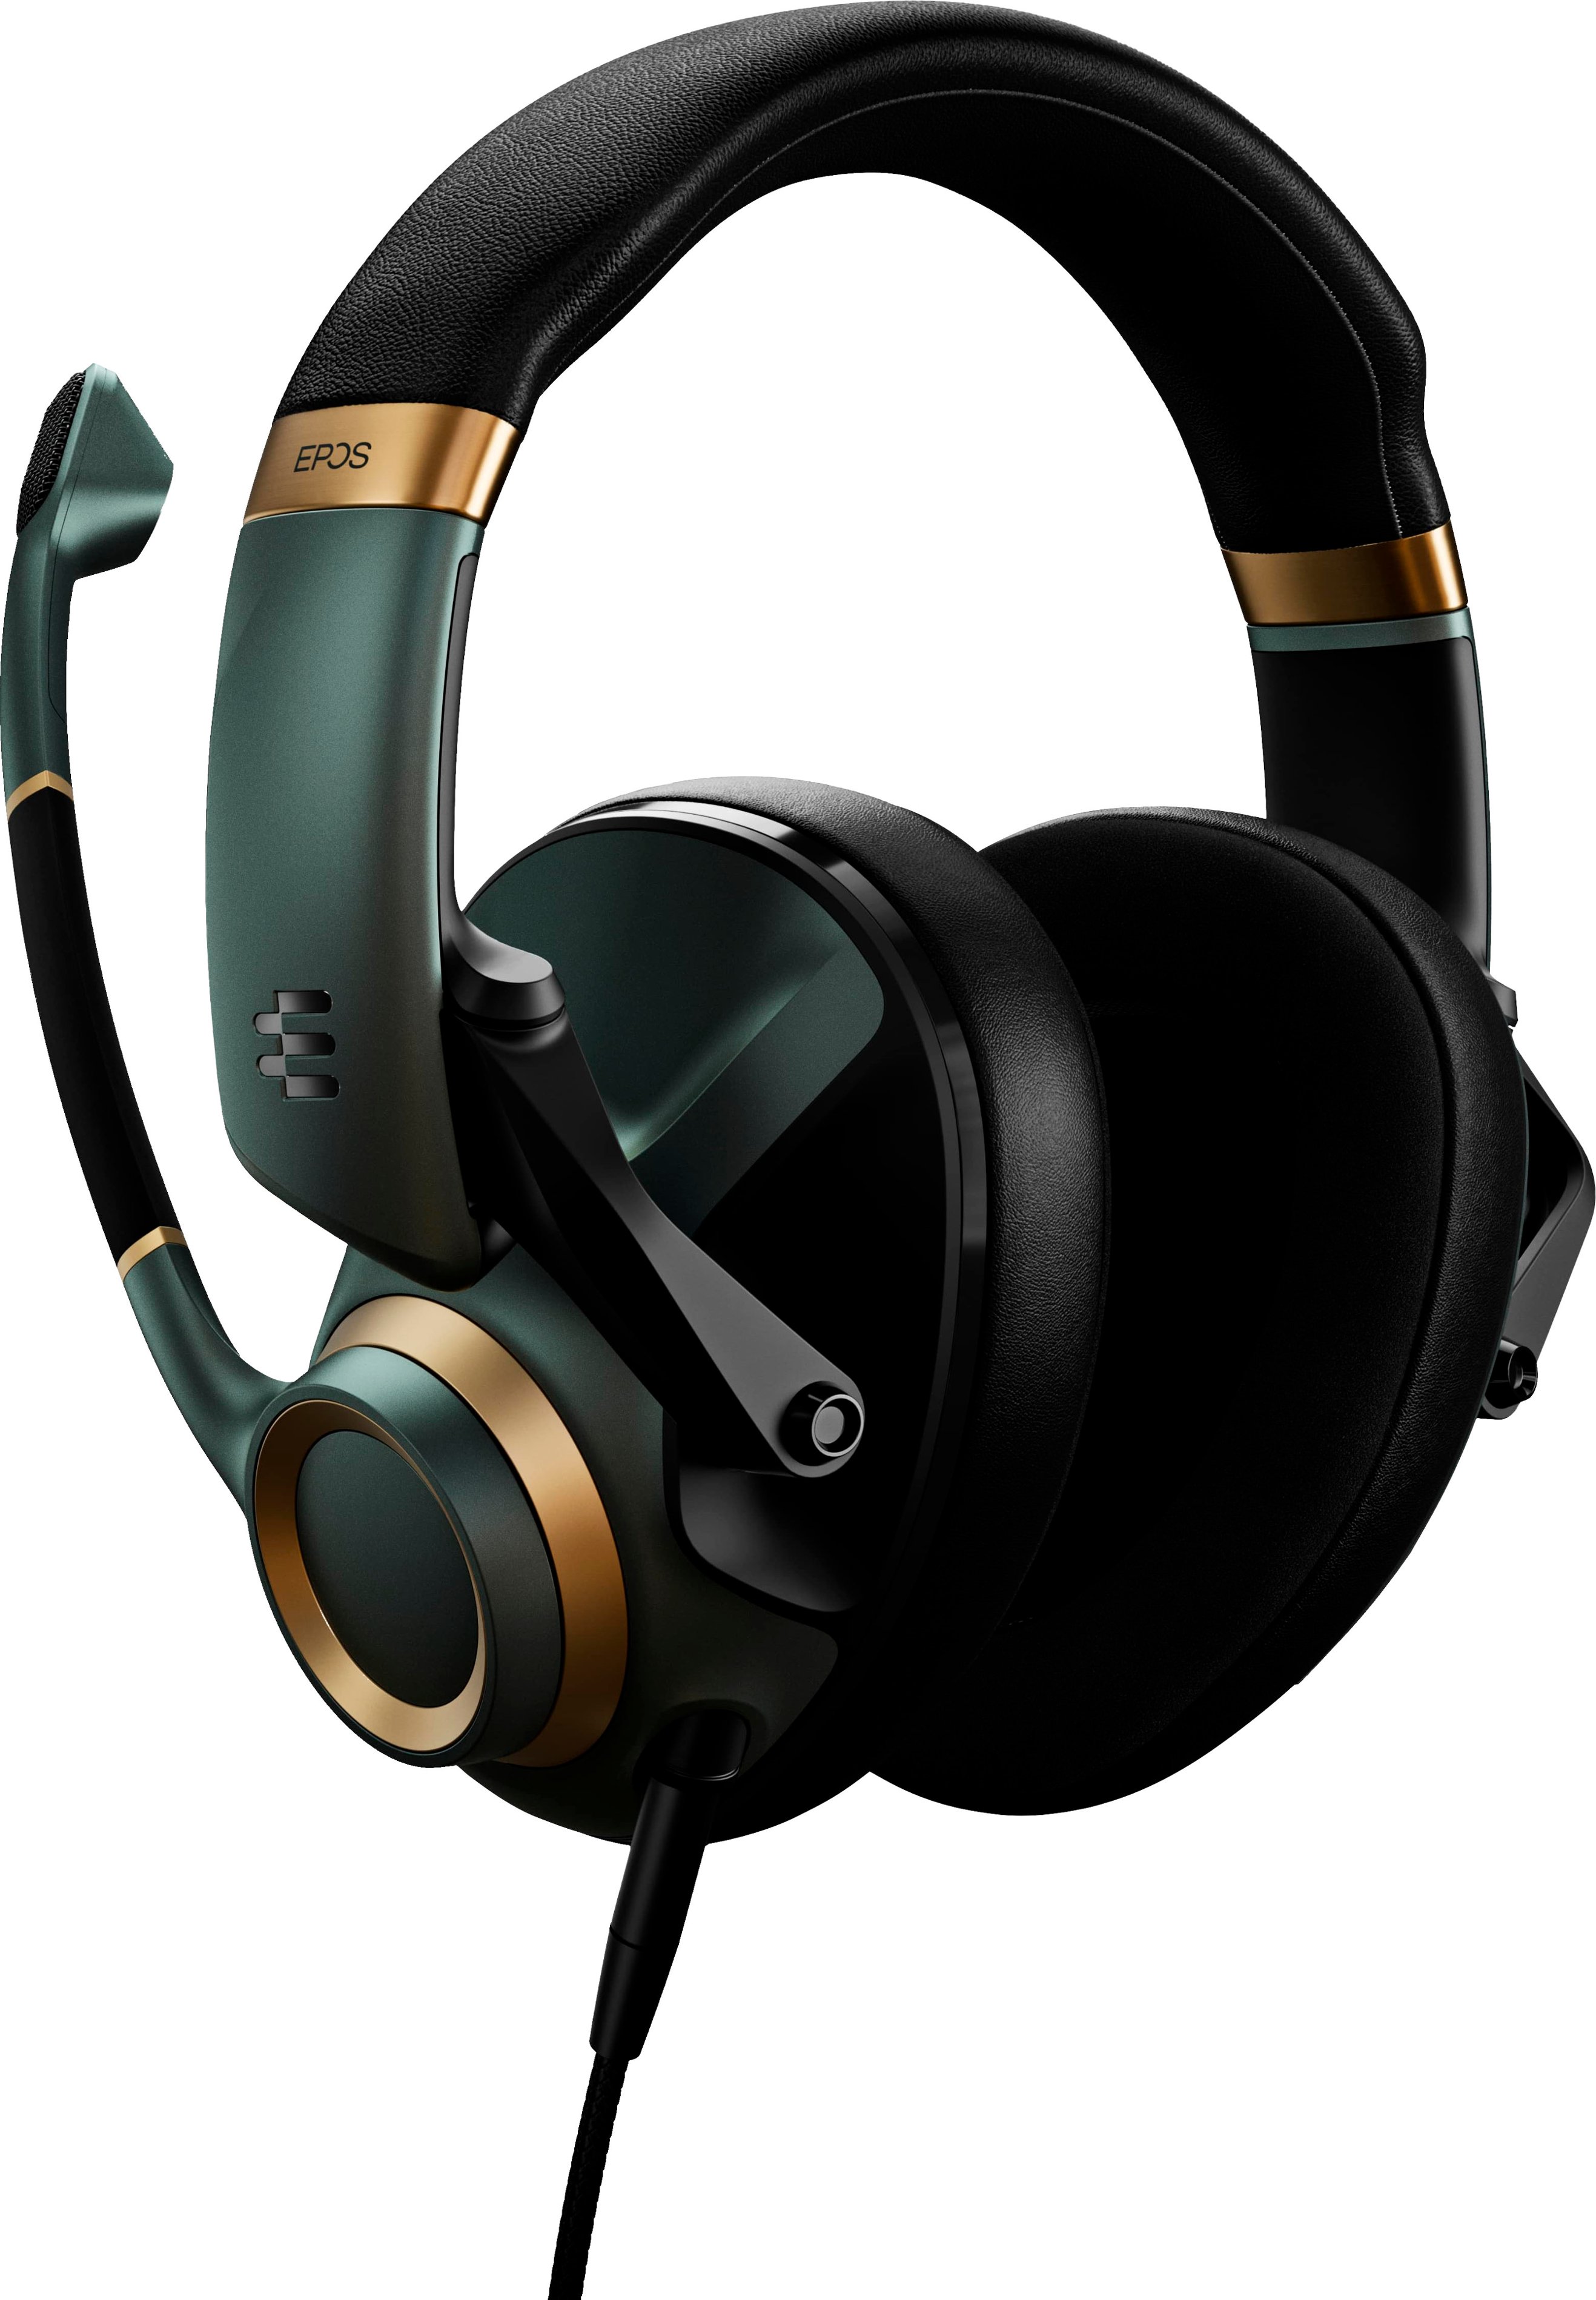 Angle View: EPOS - H6PRO Wired Closed Acoustic Gaming Headset - Racing Green